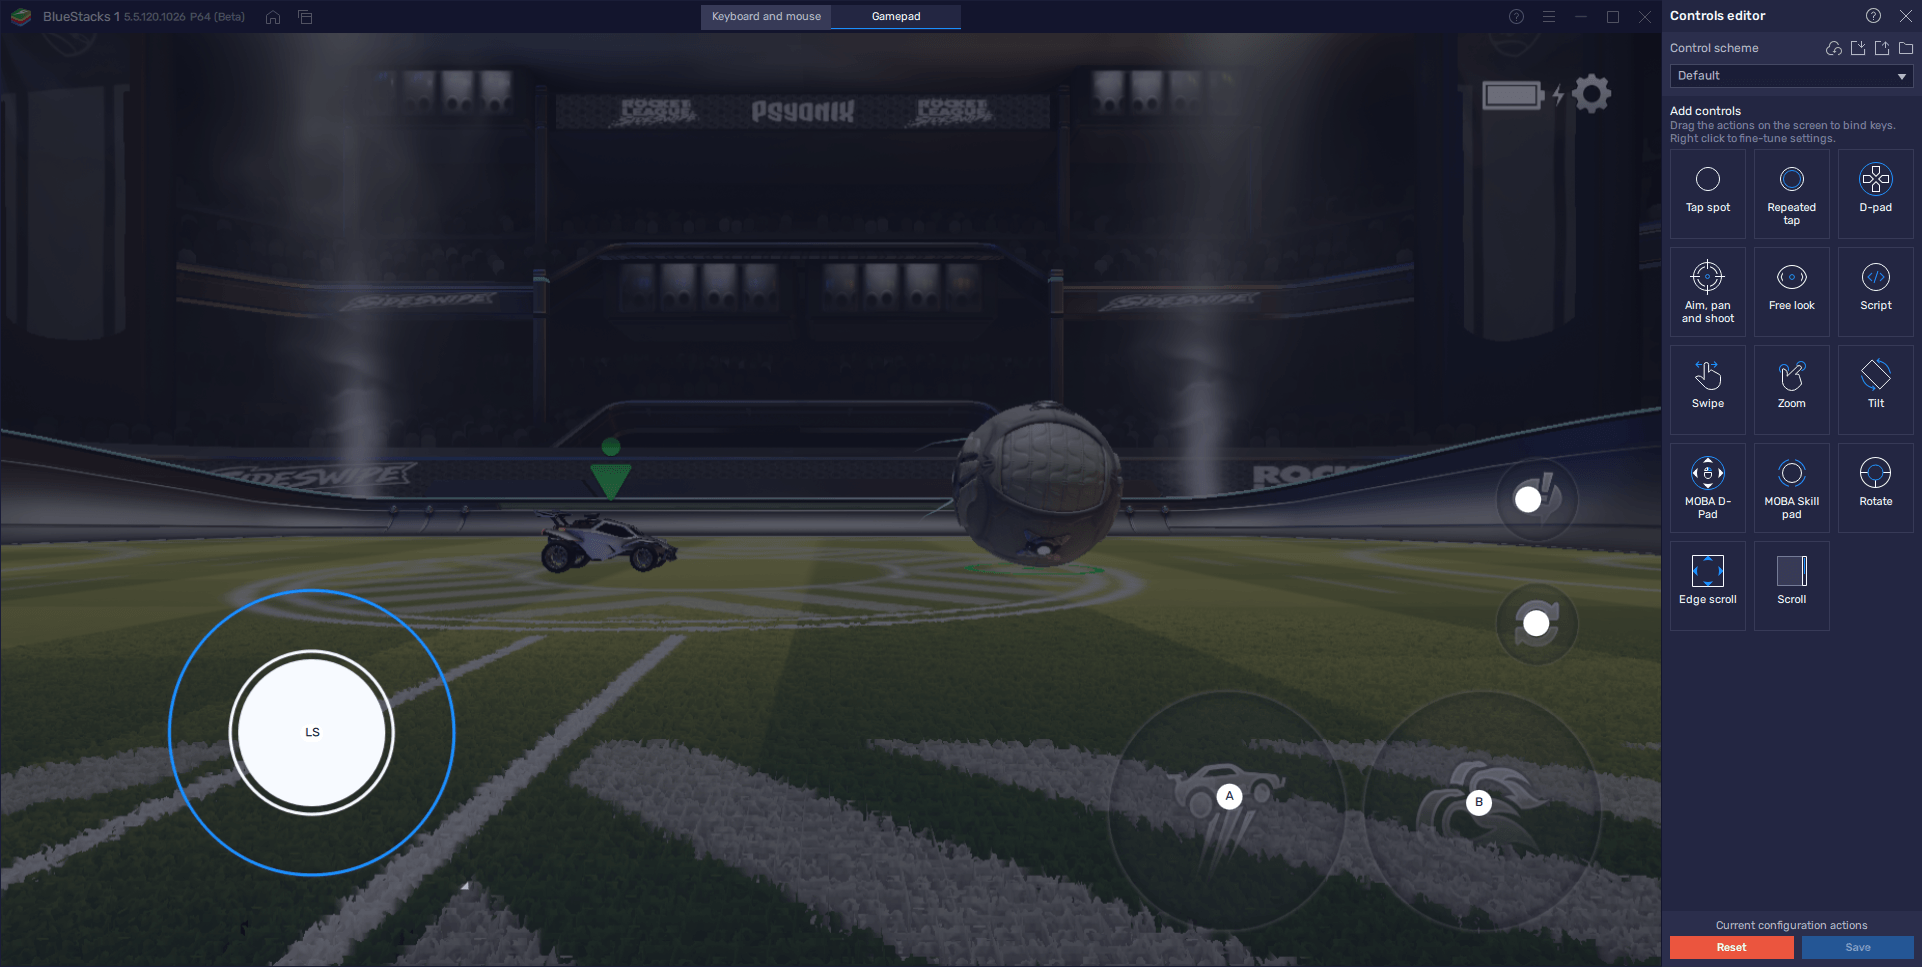 Rocket League Sideswipe on PC - How to Optimize Your Experience on BlueStacks